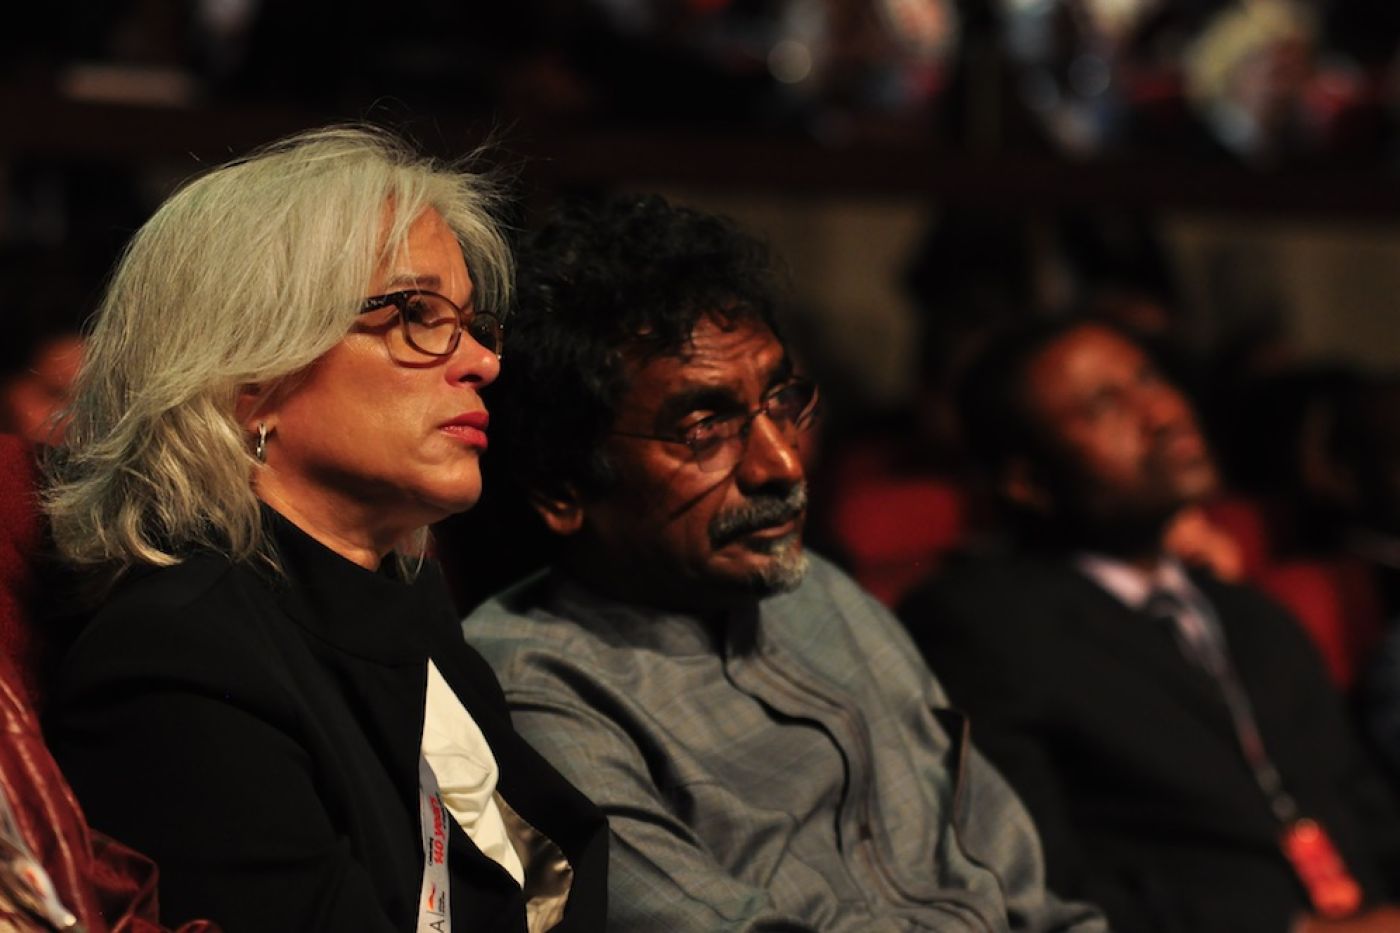 Jay Naidoo attends the 11th Nelson Mandela Annual Lecture